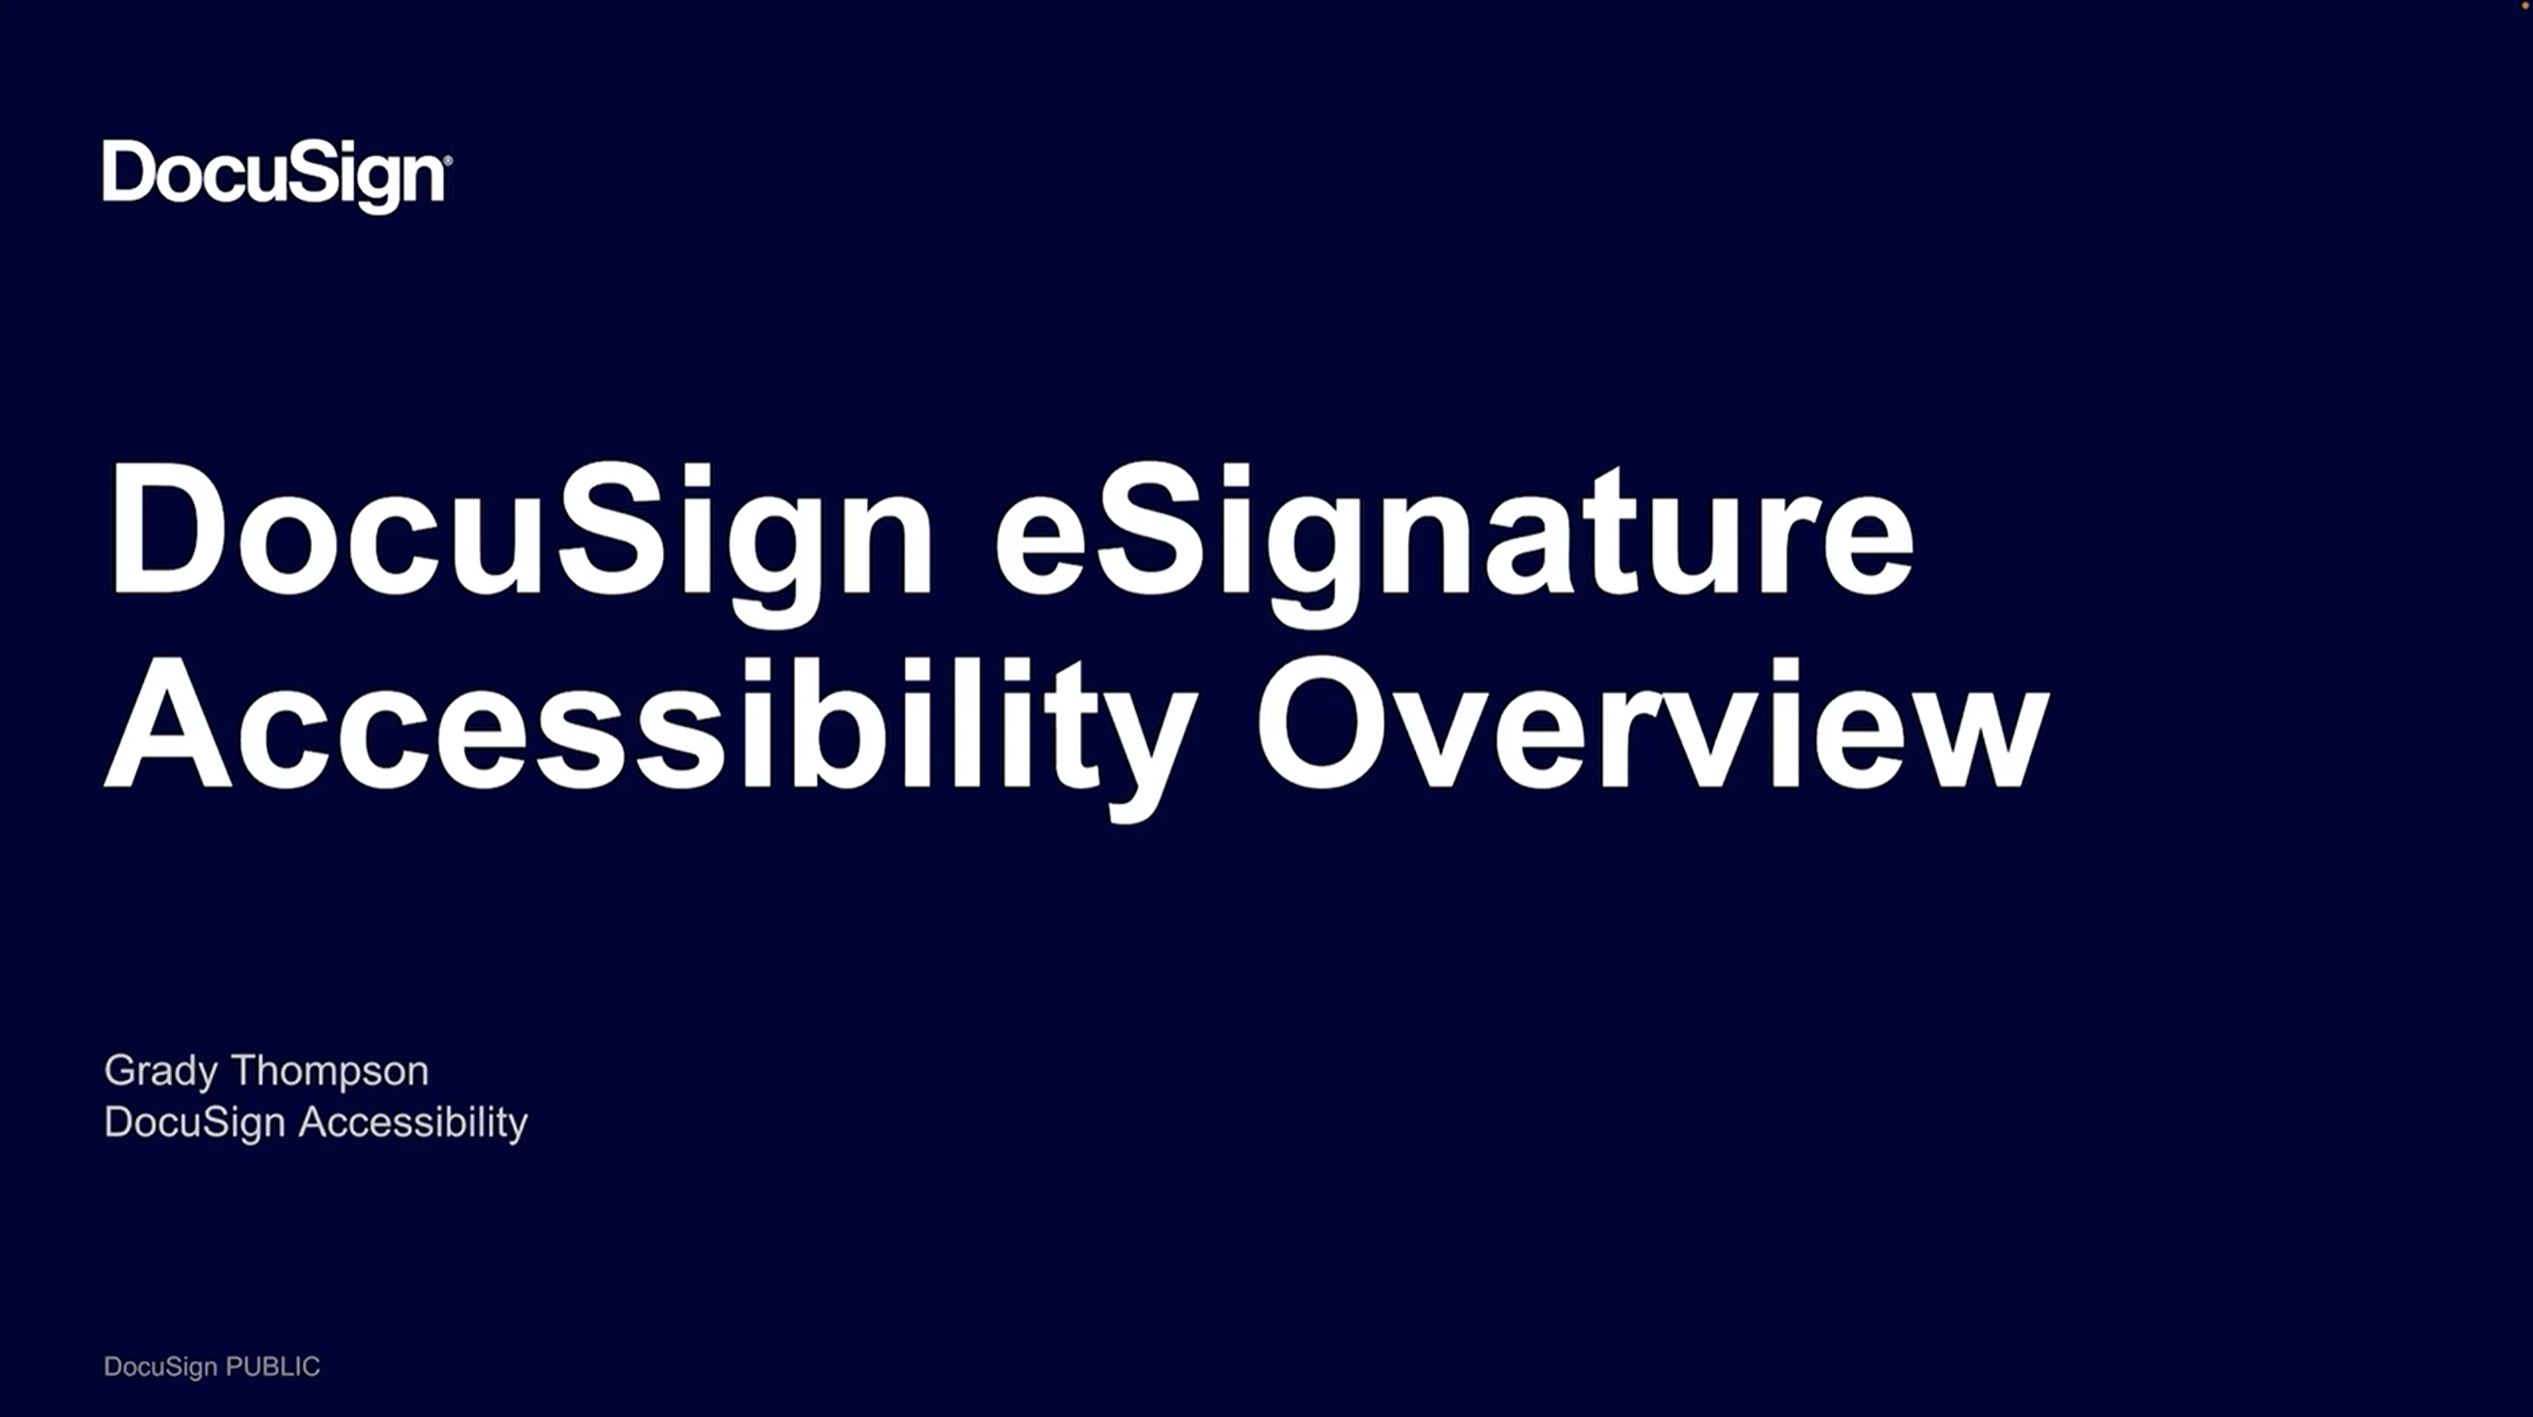 This is a cover image for the eSignature Accessibility Overview video.